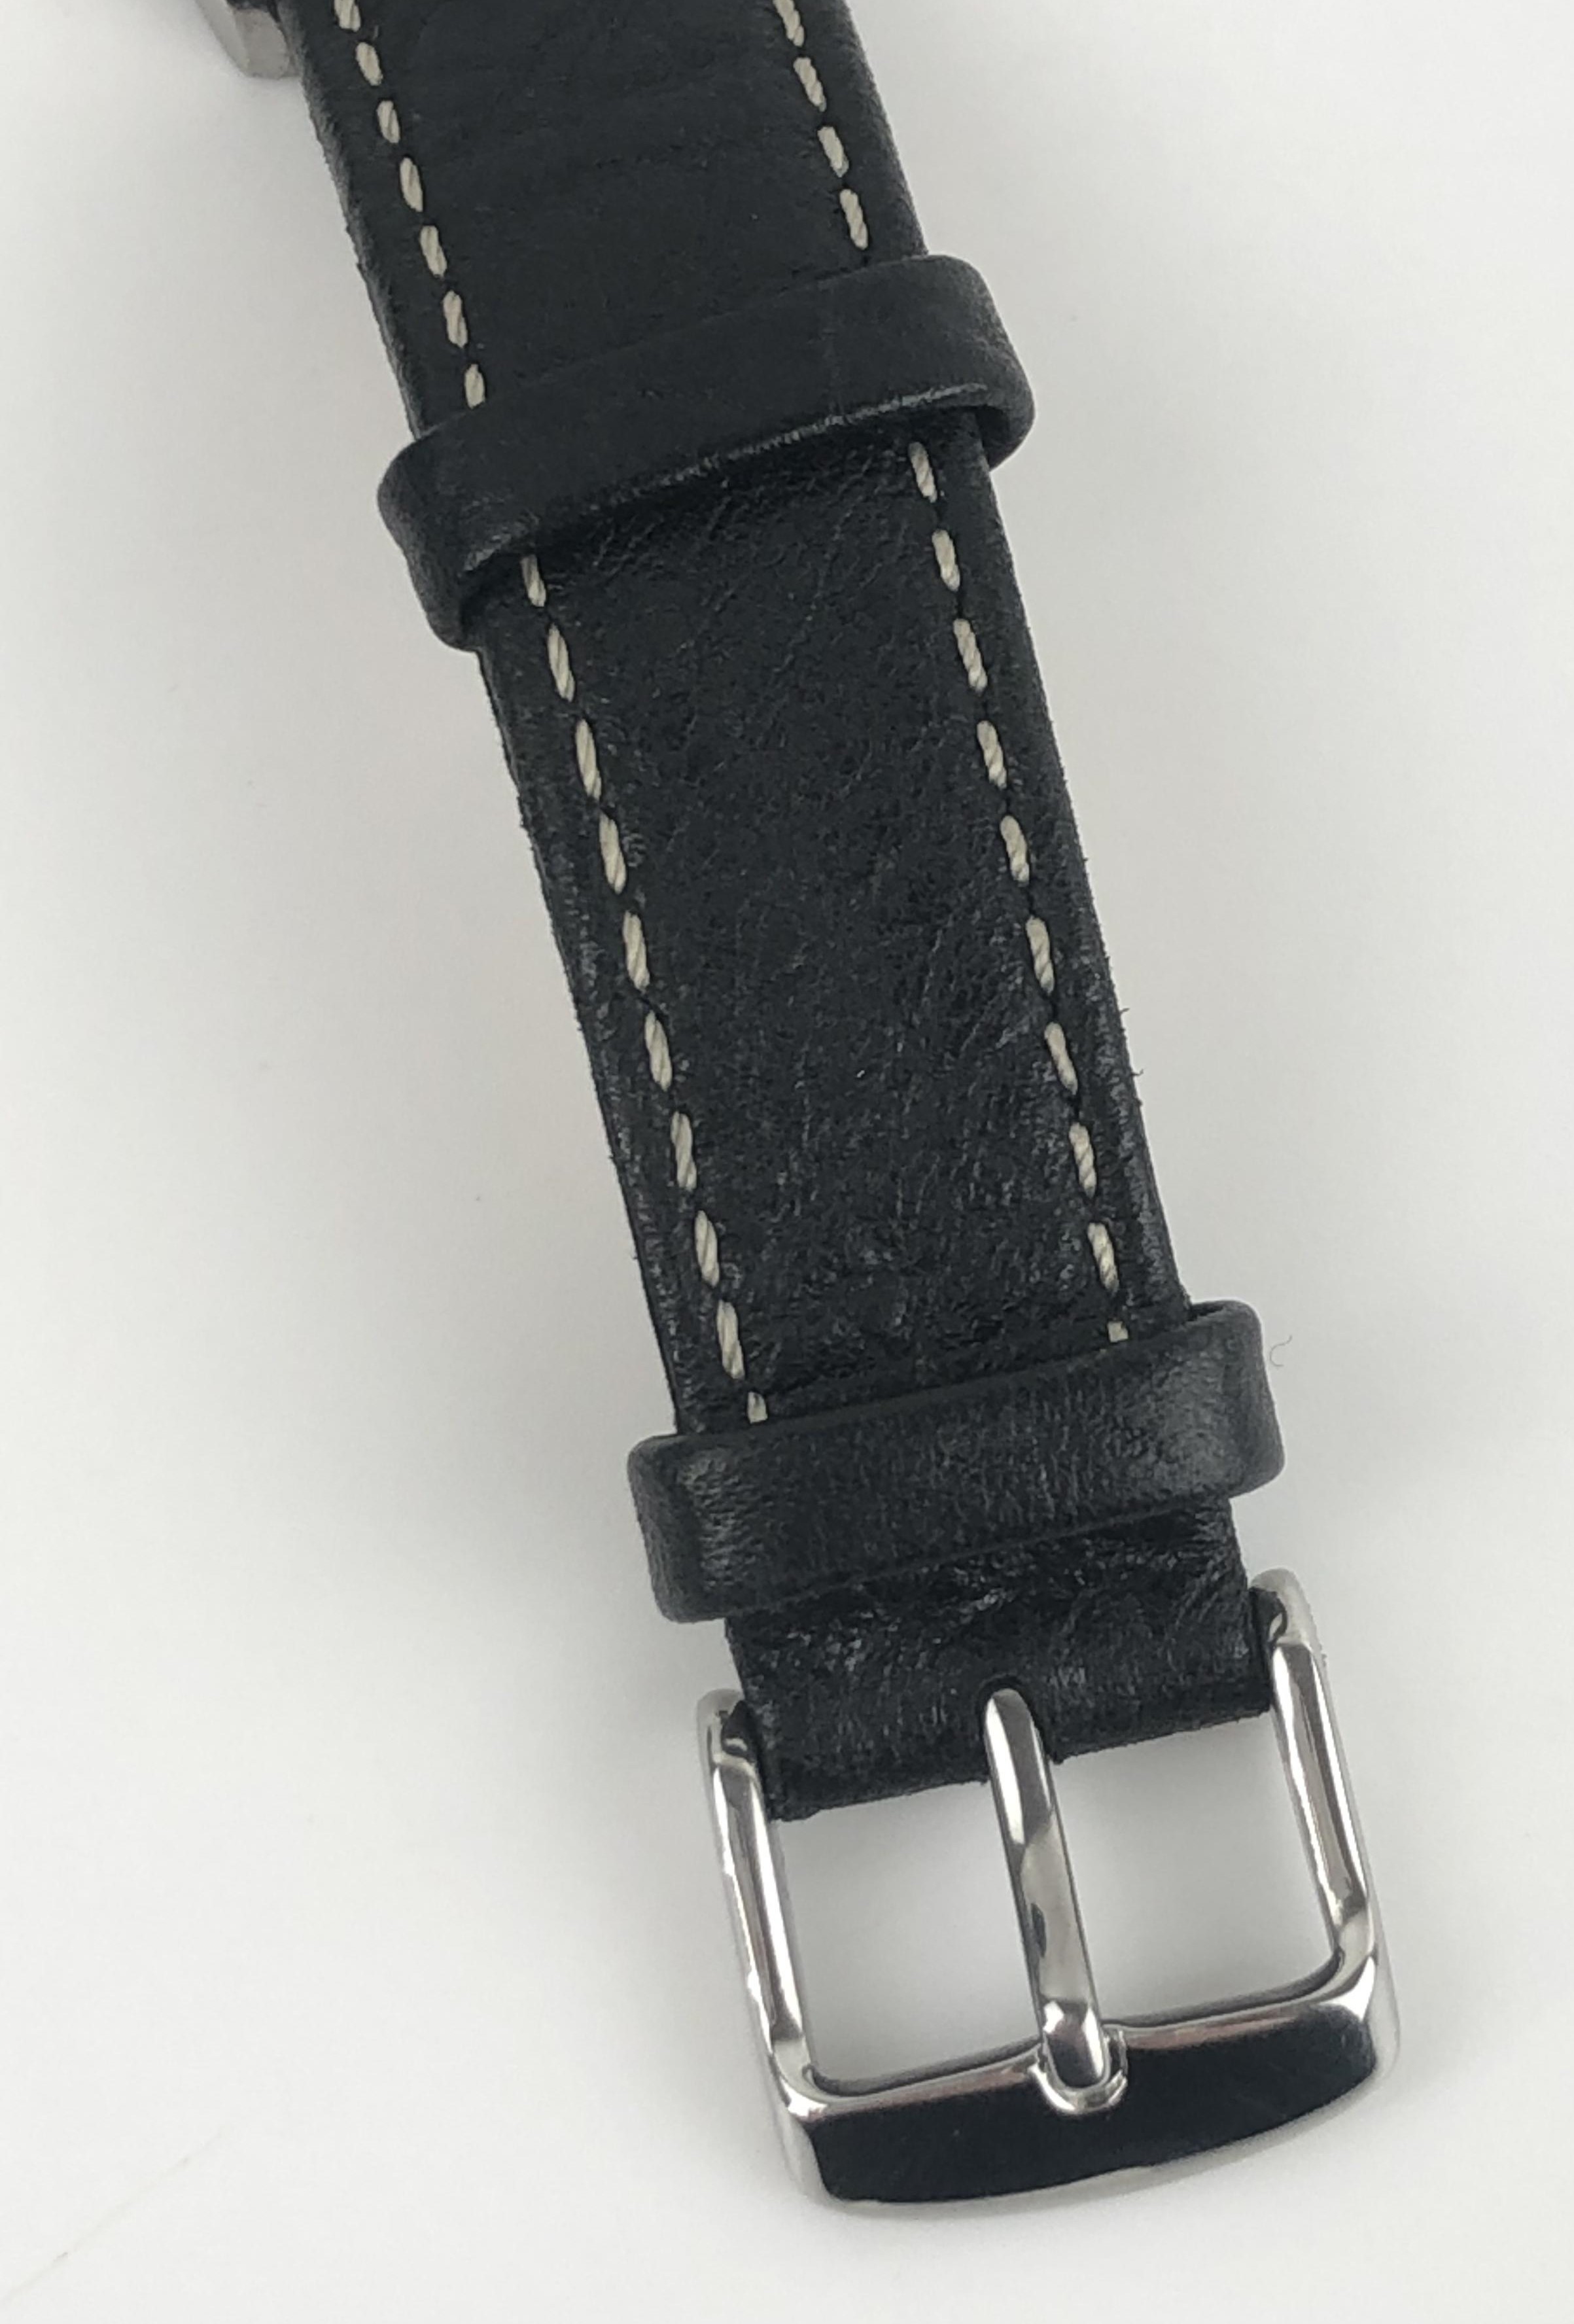 A gentleman's Universal Geneve Polerouter Automatic Microtor wristwatch, with a black dial currently - Image 7 of 10